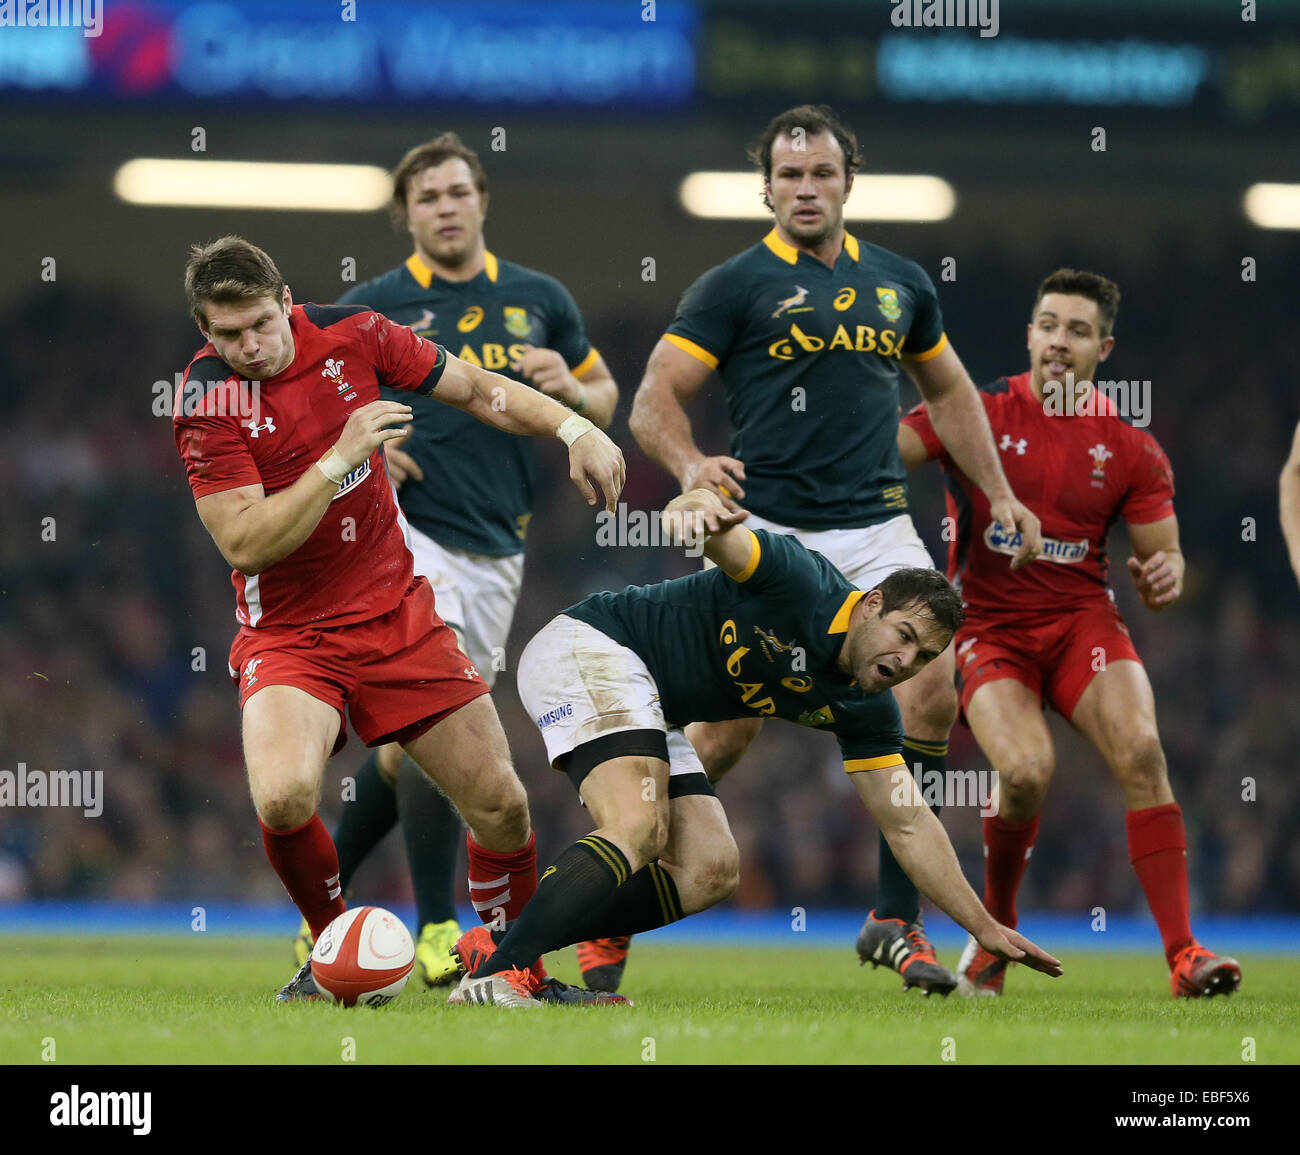 Cardiff, UK. 29th Nov, 2014. Dan Biggar of Wales pounces on a mistake by Cobus Reinach of South Africa - Autumn Internationals - Wales vs South Africa - Millennium Stadium - Cardiff - Wales - 29th November 2014 - Picture Simon Bellis/Sportimage. Credit:  csm/Alamy Live News Stock Photo